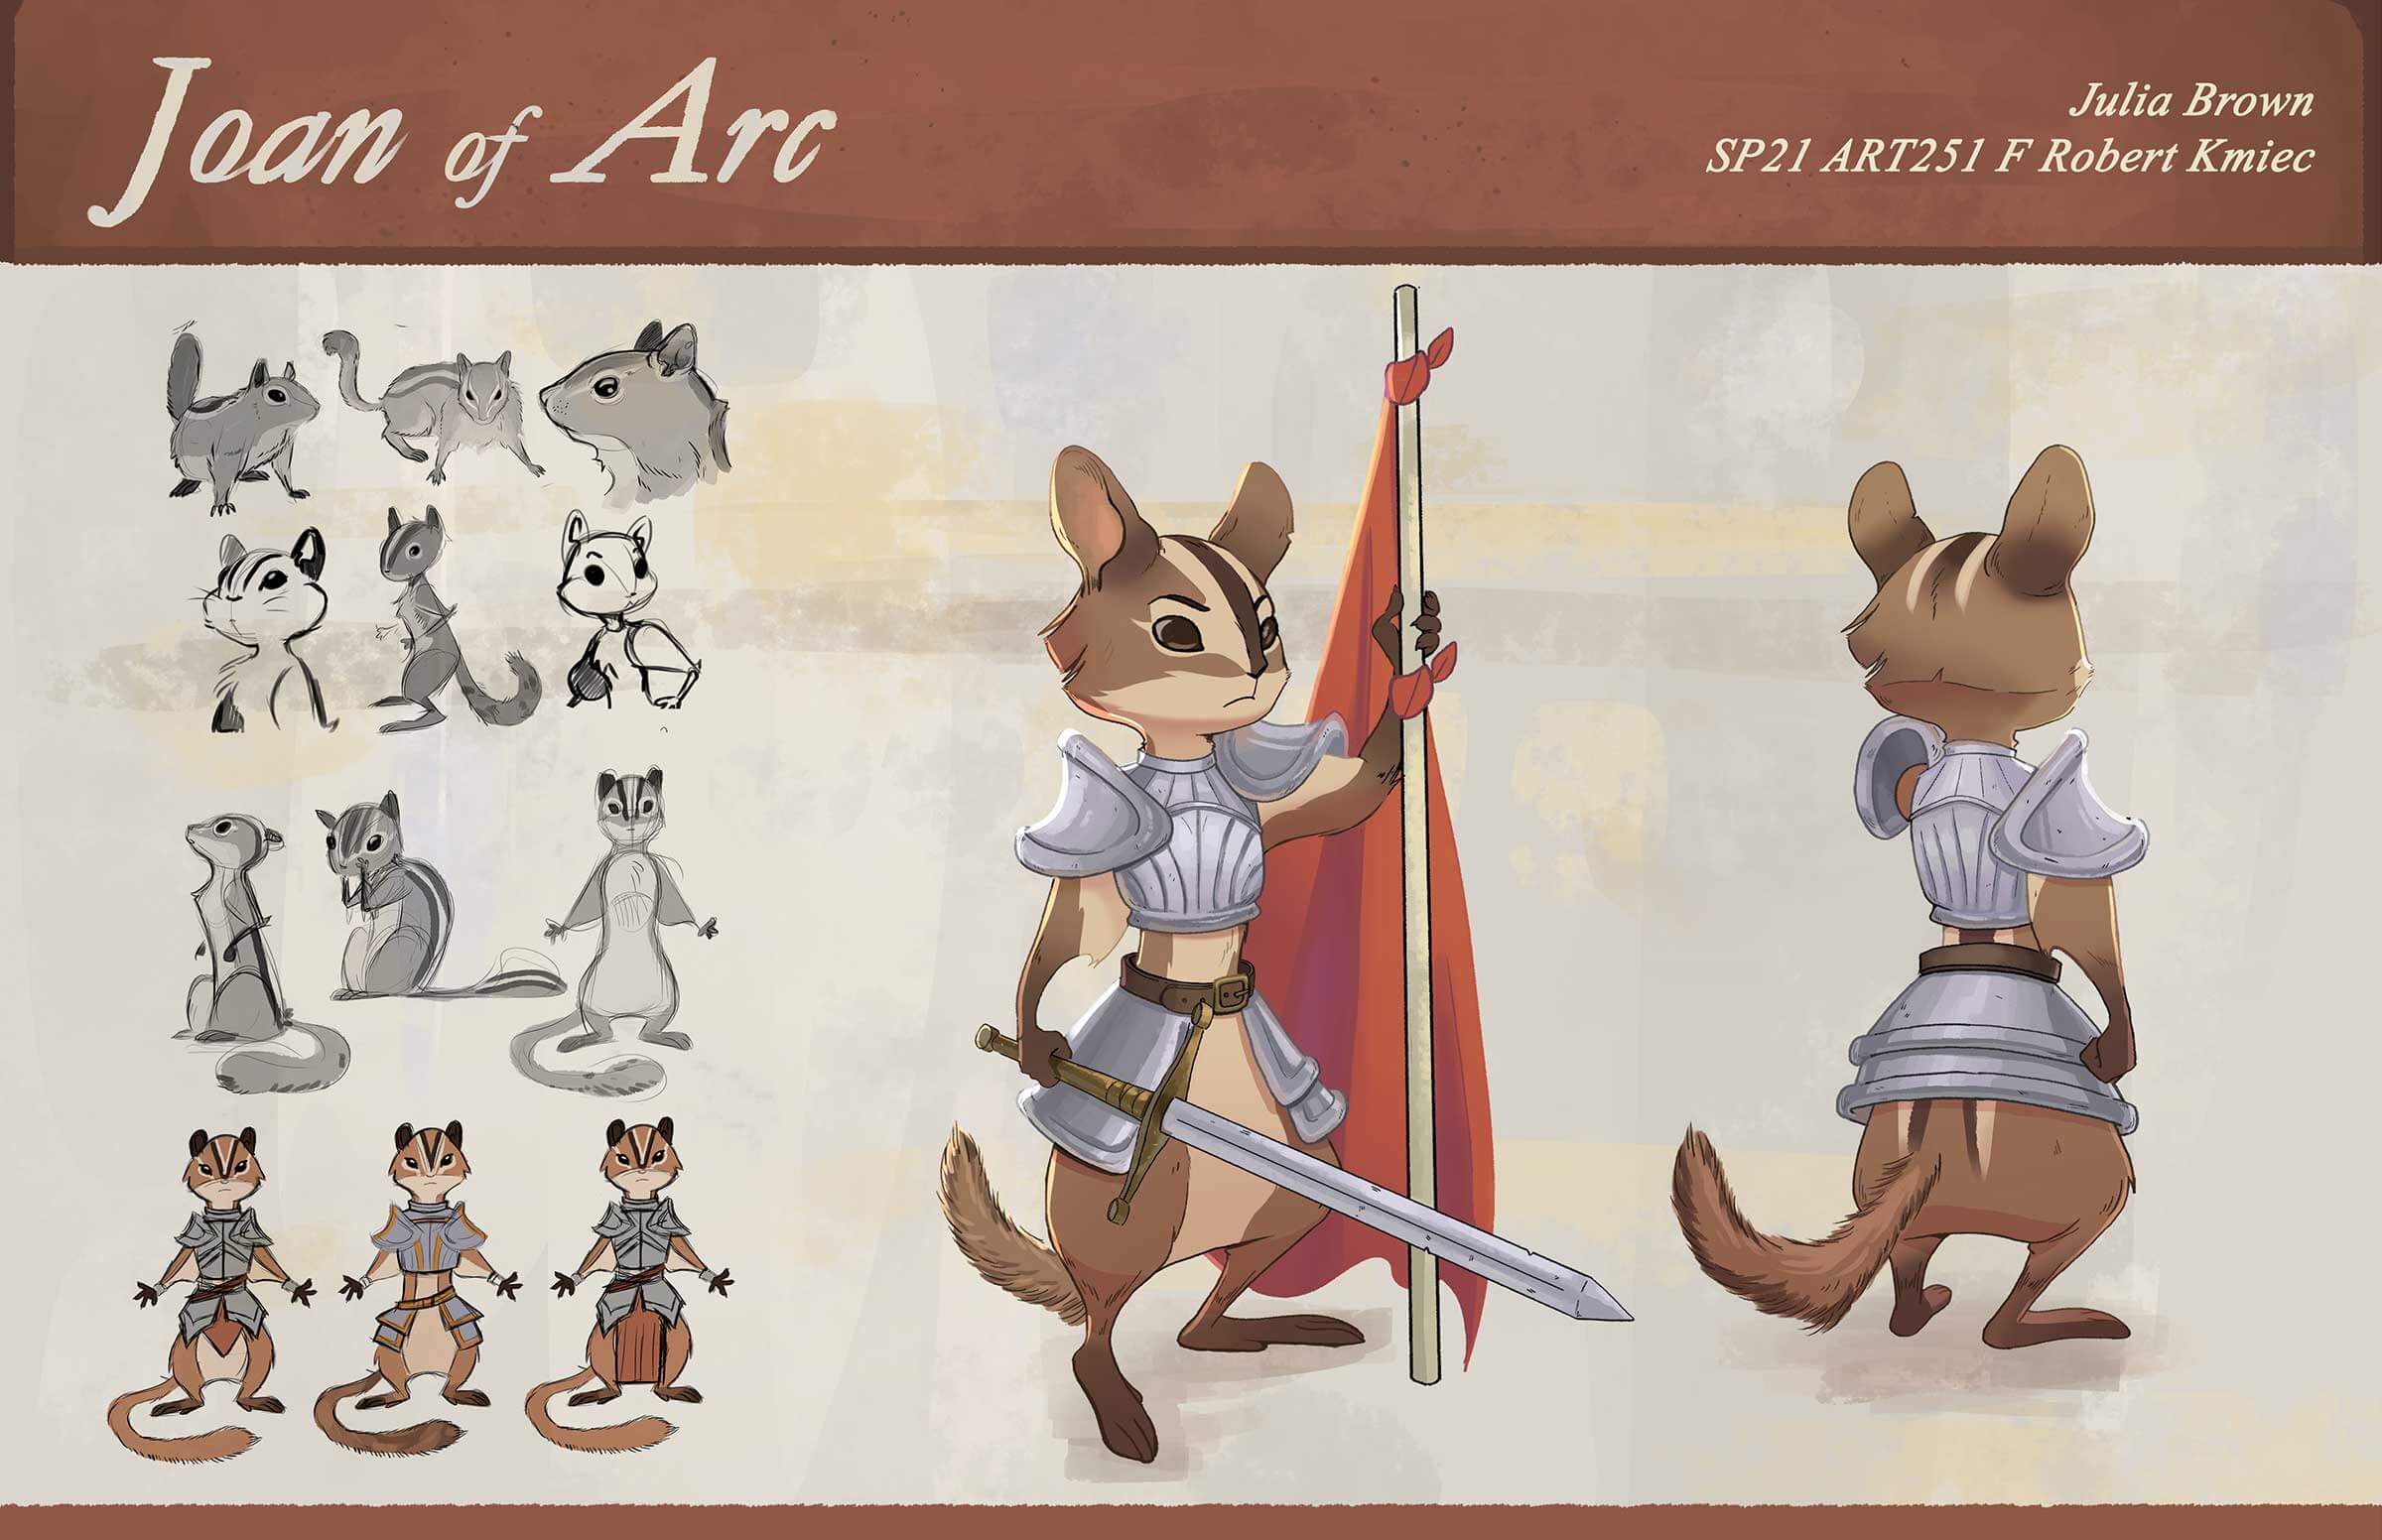 Character art of the front and back of Joan of Arc as a cartoon squirrel.